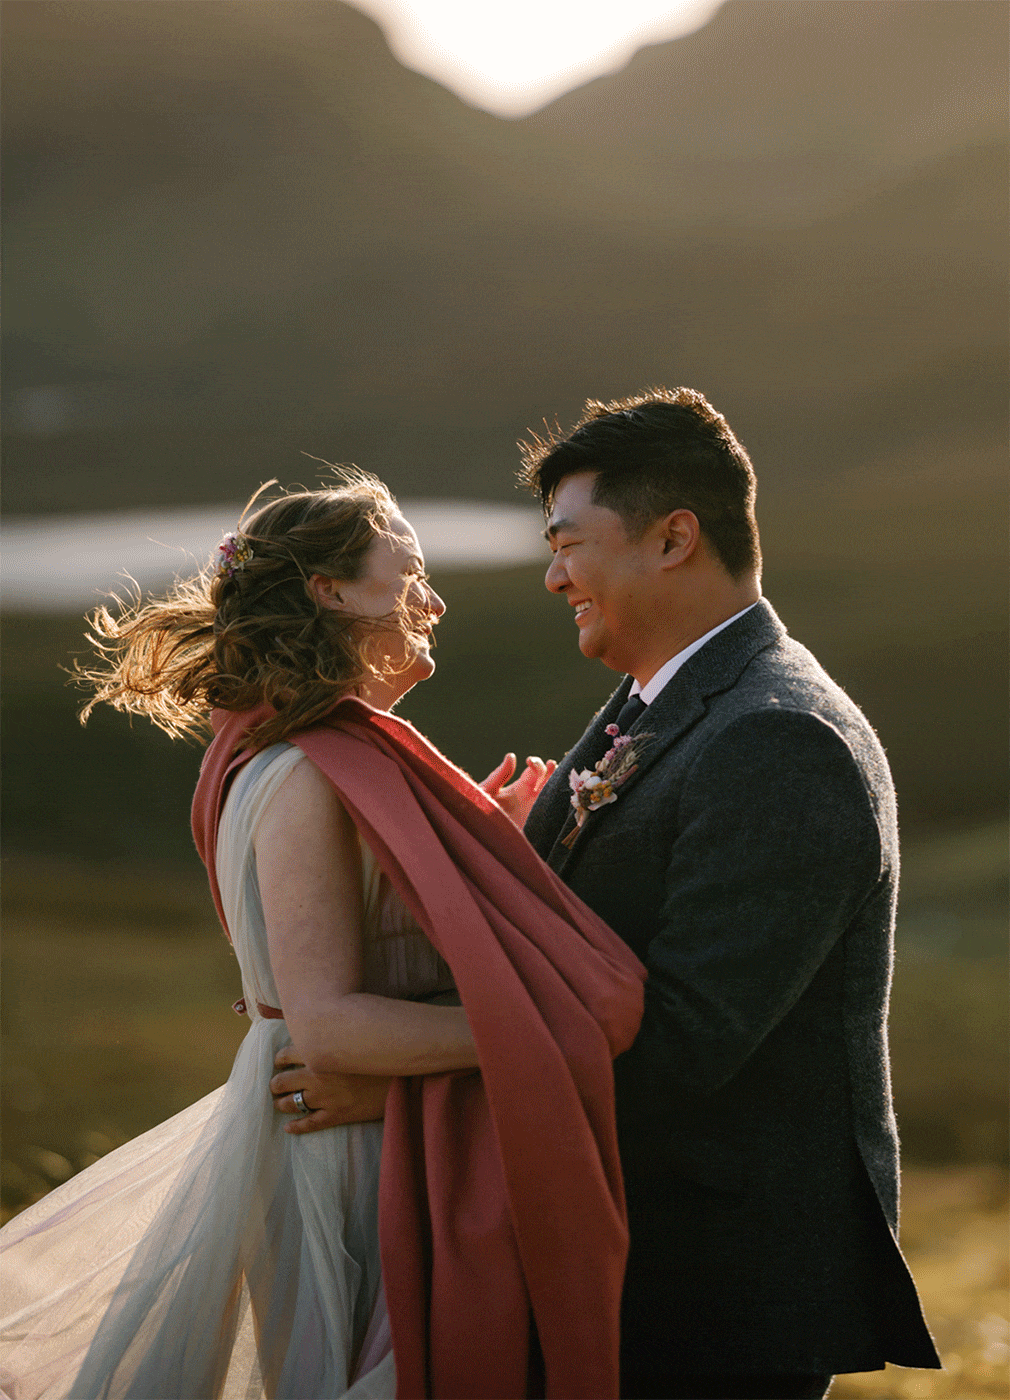 Mellie and Andrew shared an intimate moment during their Isle of Skye elopement